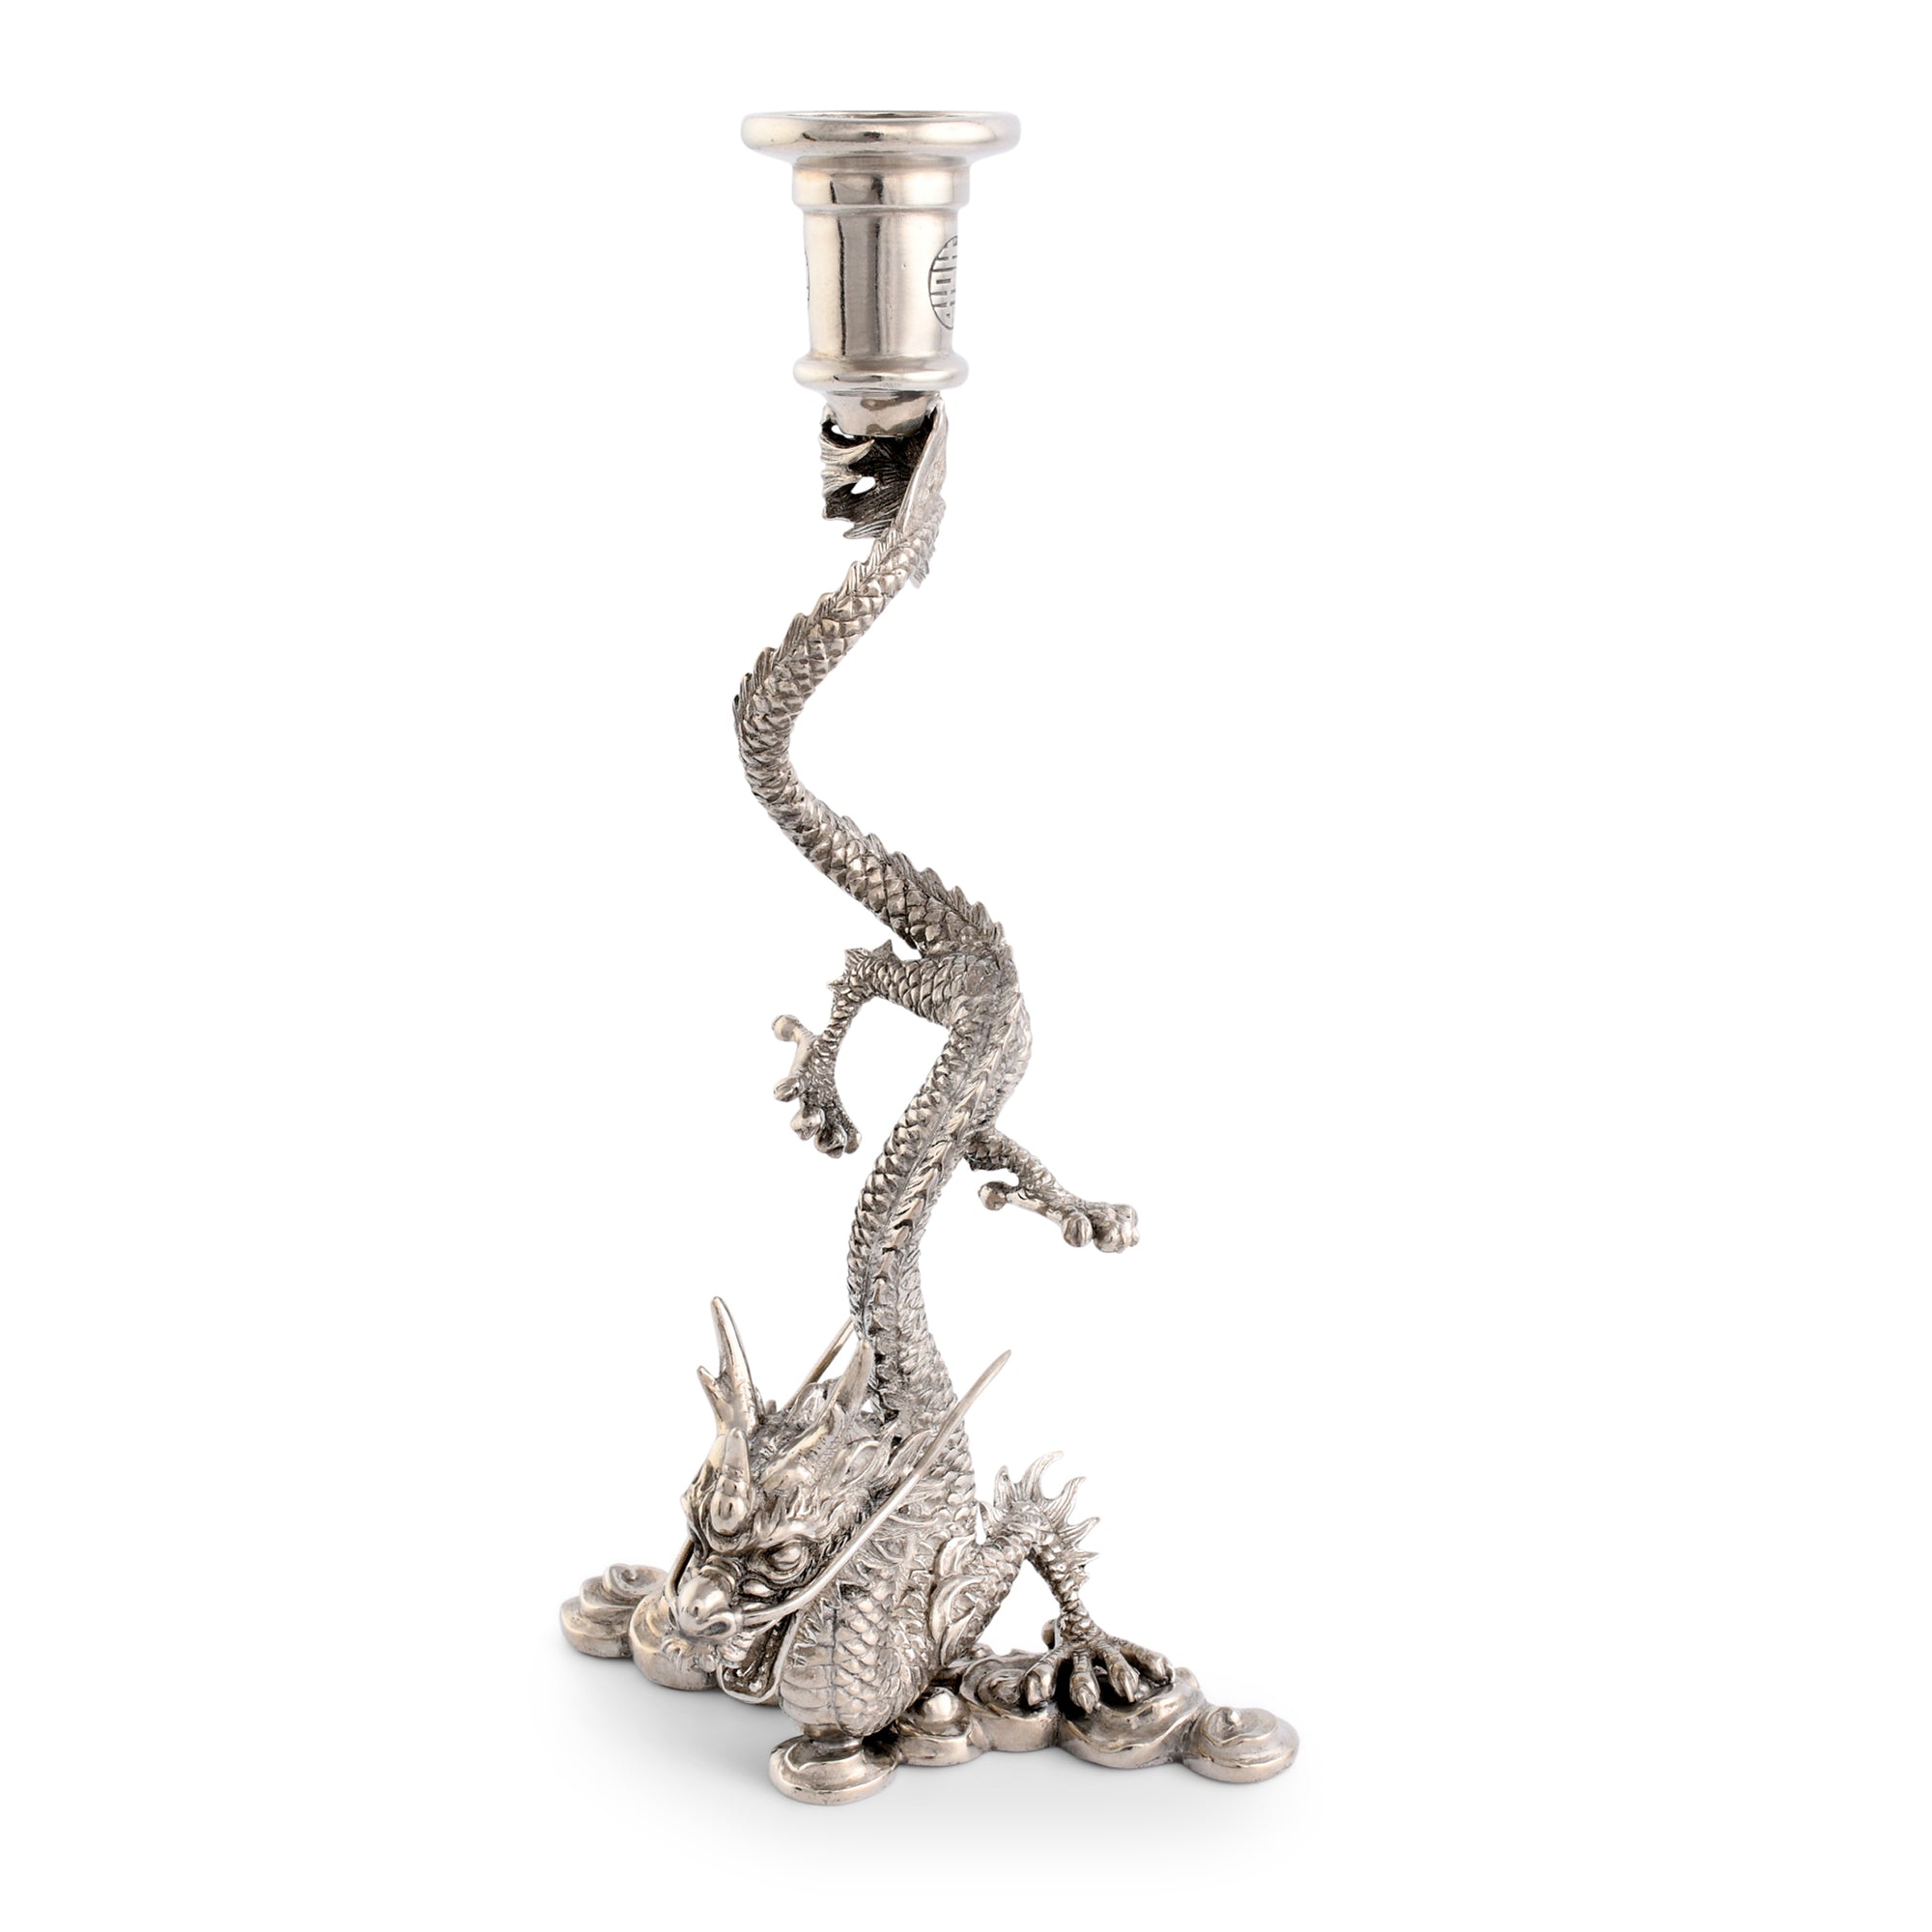 Vagabond House Dragon Pewter Candlestick Product Image